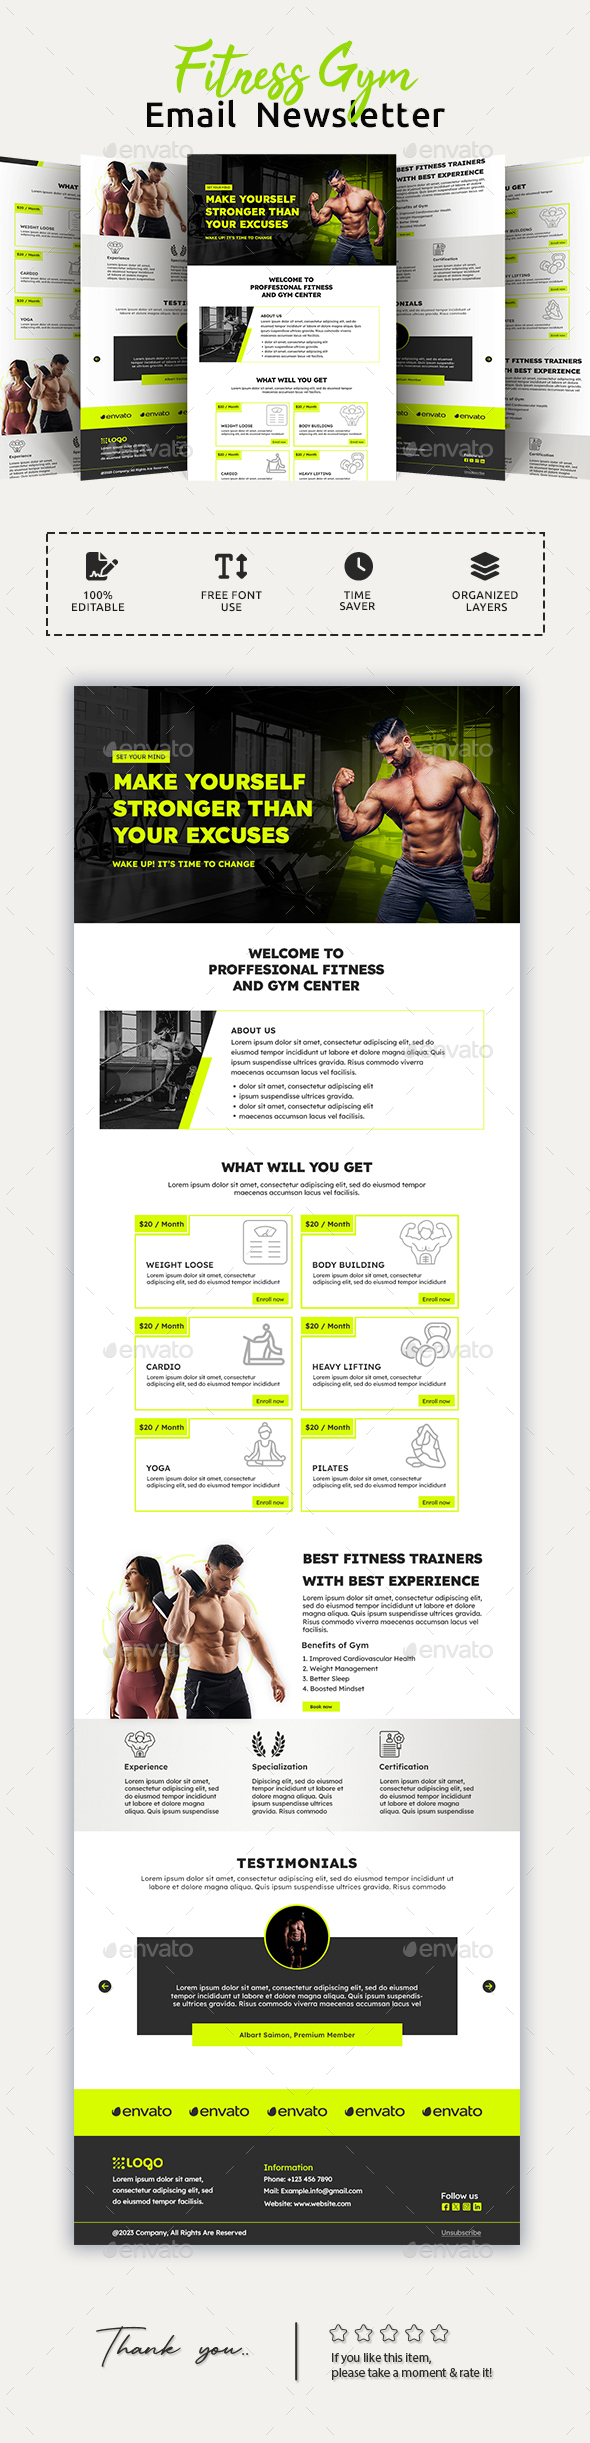 Fitness Gym Email Newsletter PSD Template